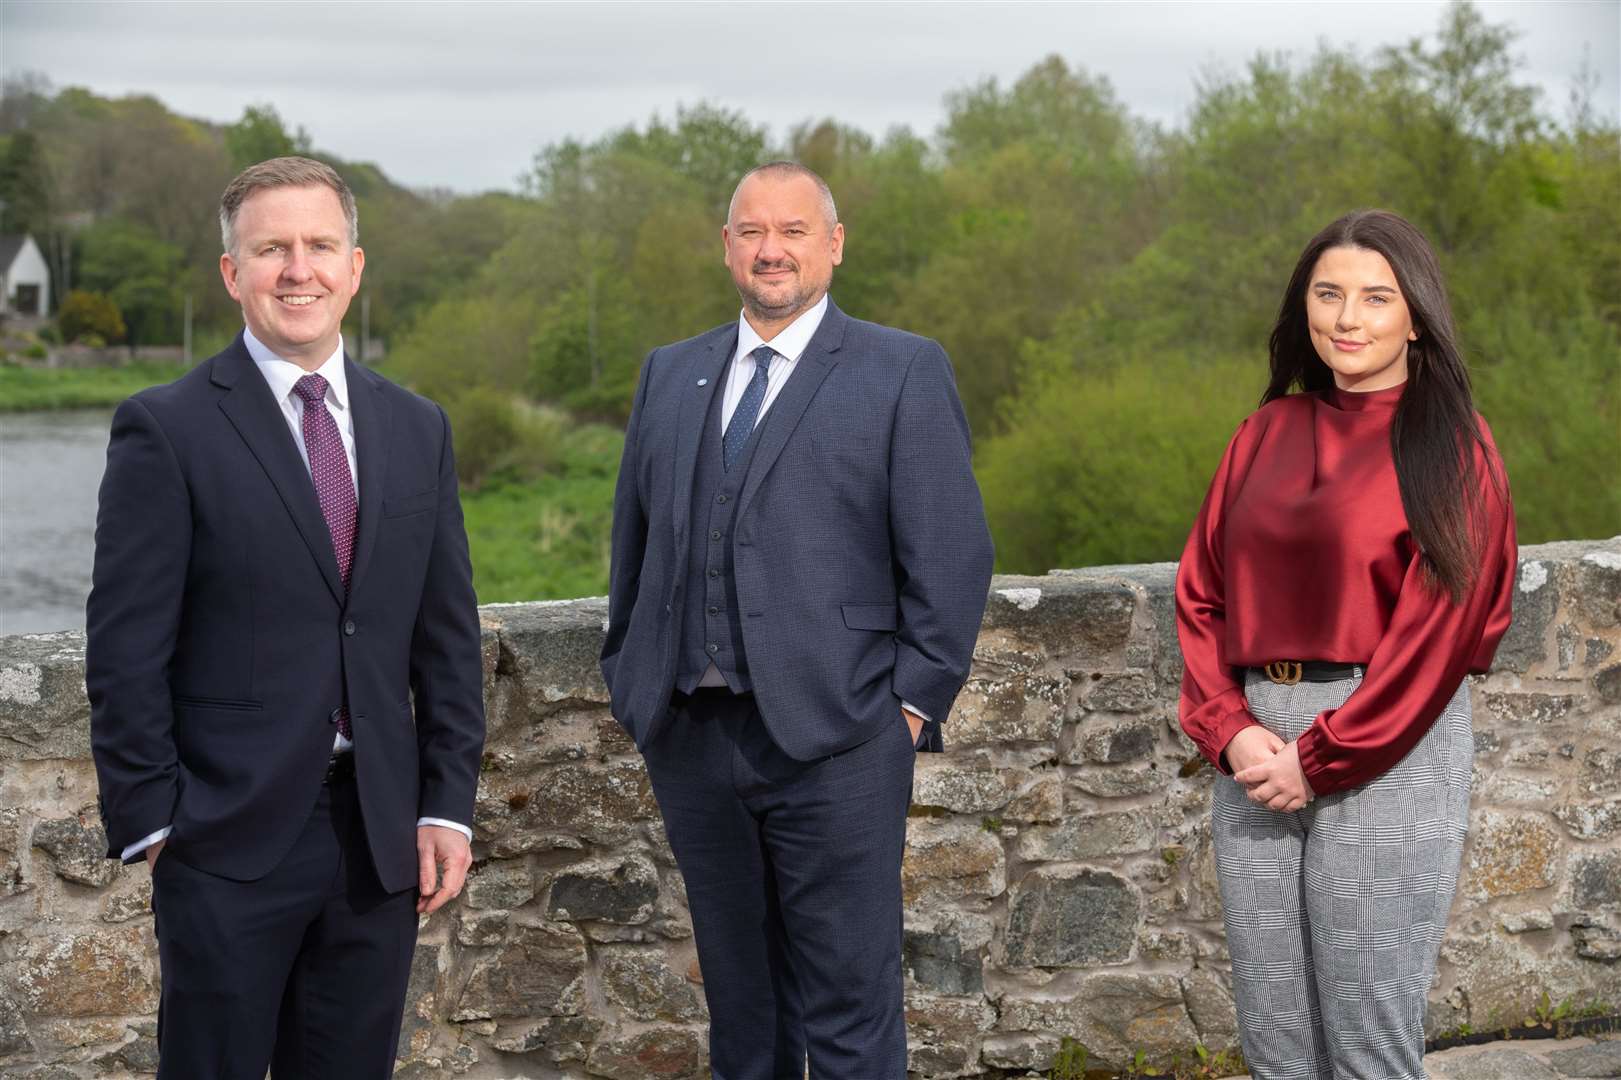 Phil Anderson Financial Services has welcomed new members to its team Andrew Scouller (left) and Emma Reid, who are with company founder and managing director Phil Anderson.